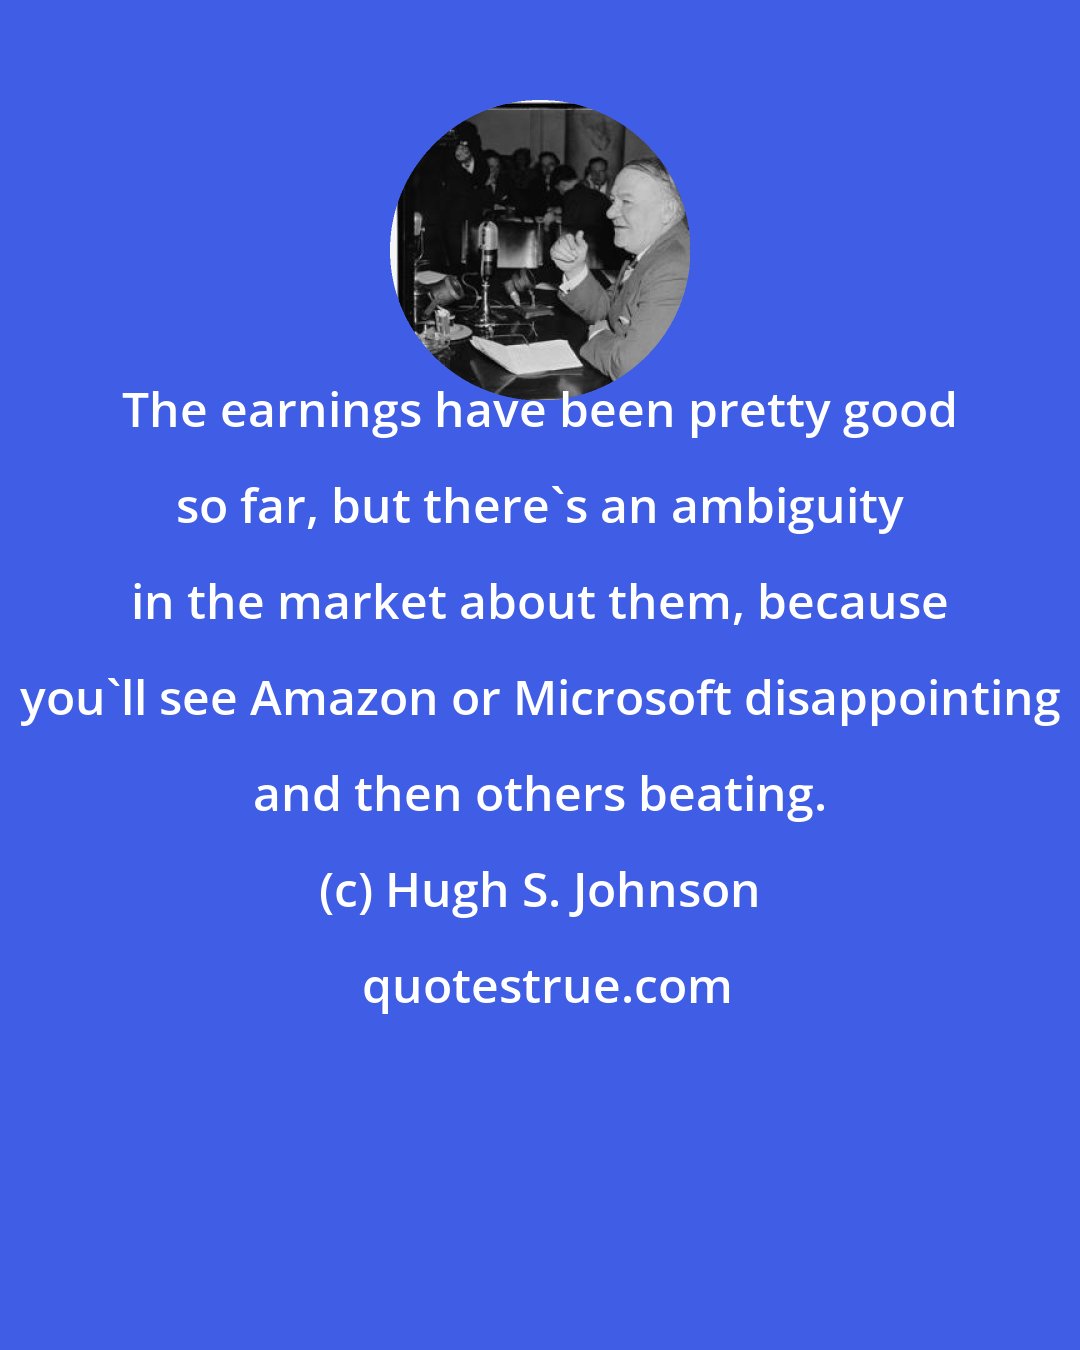 Hugh S. Johnson: The earnings have been pretty good so far, but there's an ambiguity in the market about them, because you'll see Amazon or Microsoft disappointing and then others beating.